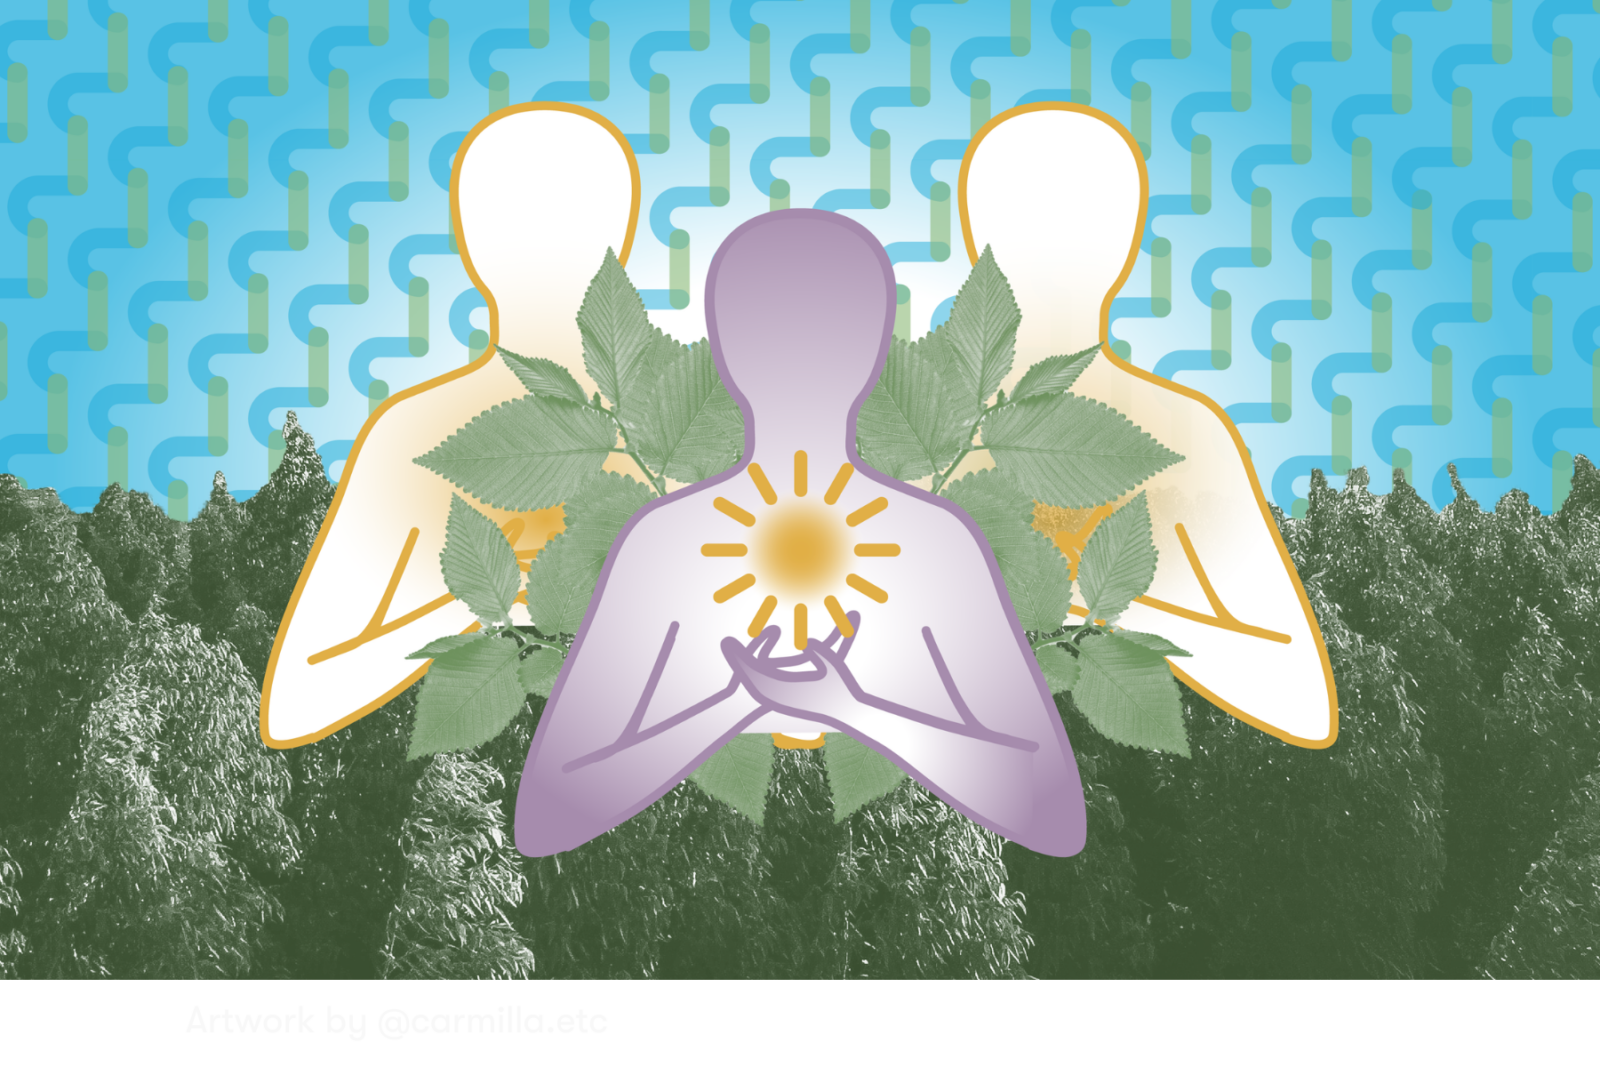 A digital collage showing three figures surrounded by leaves, with one appearing to hold the sun in their hands